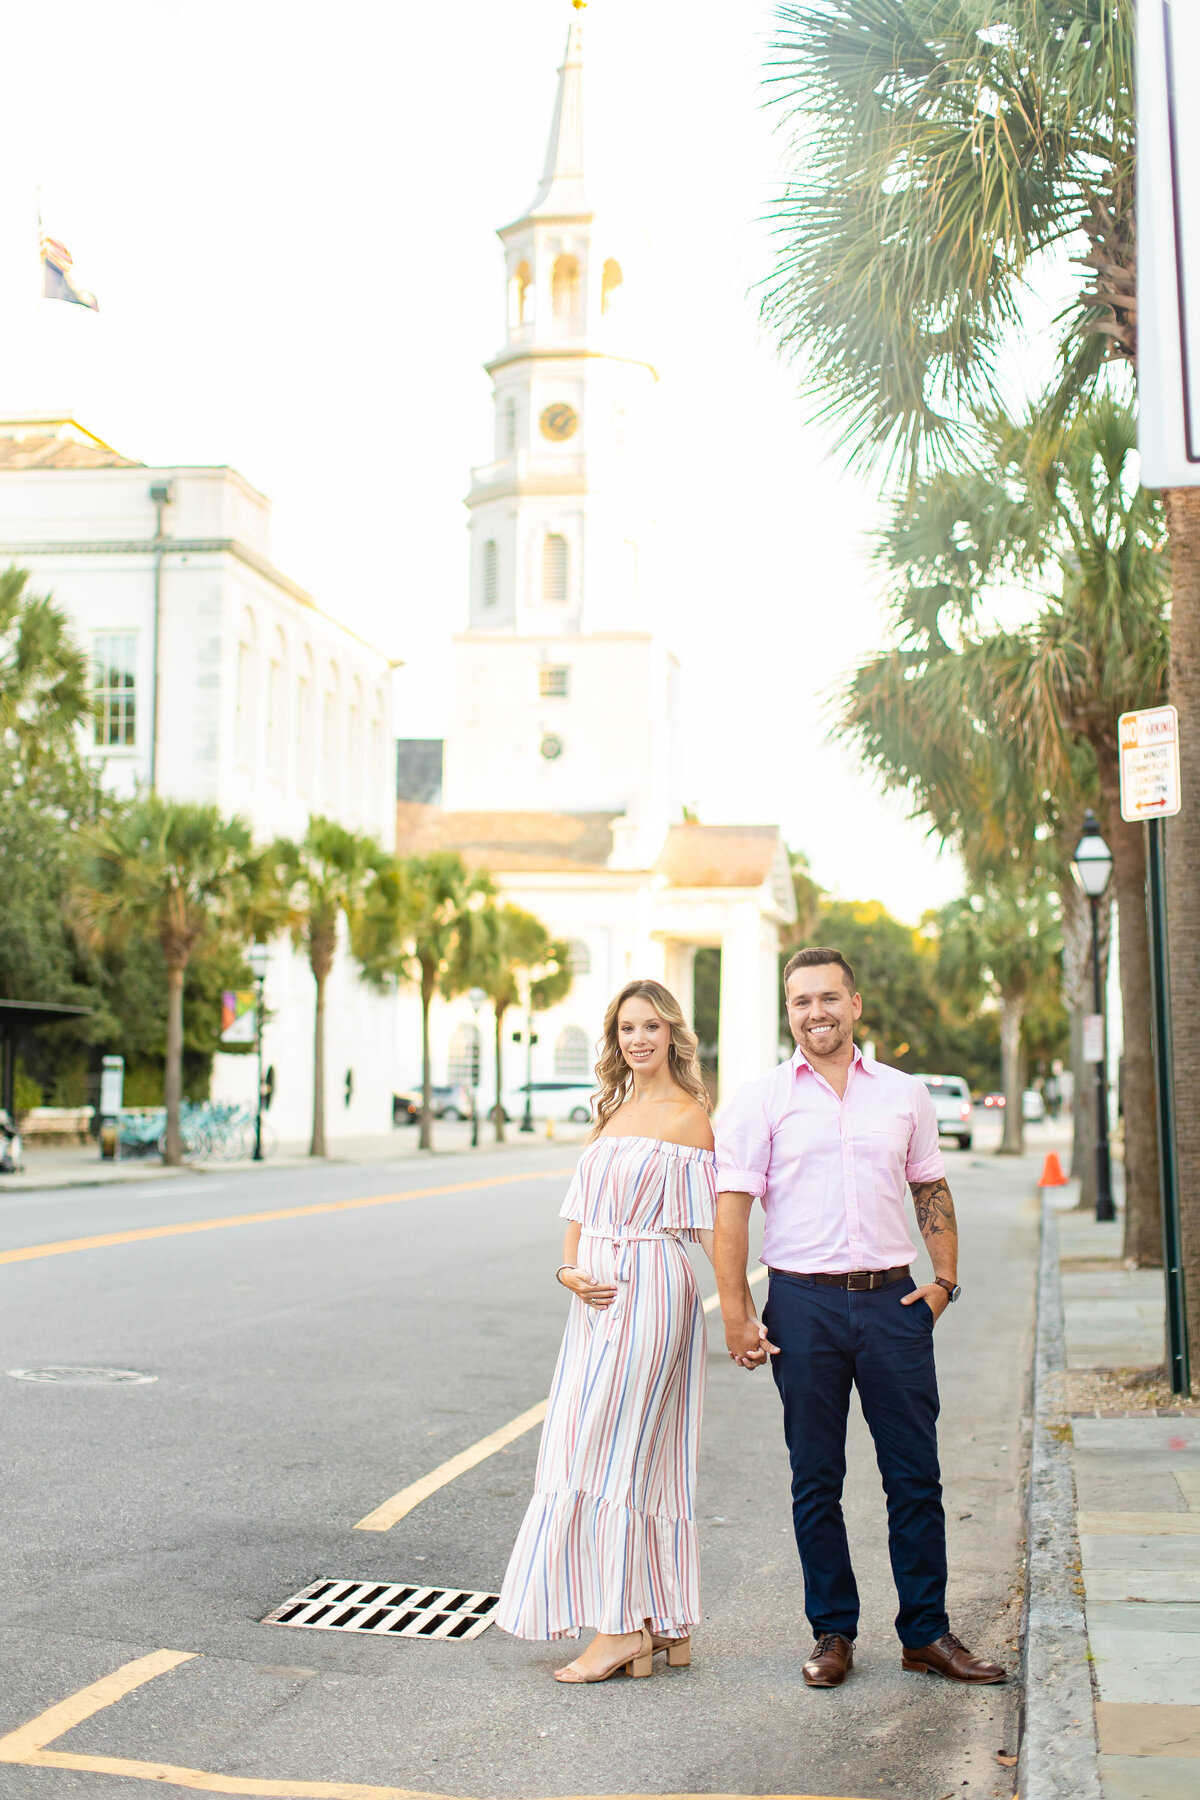 Taylor Main Photography is a wedding photographer based in South Carolina serving South Carolina, Virginia and Beyond Brides and Grooms